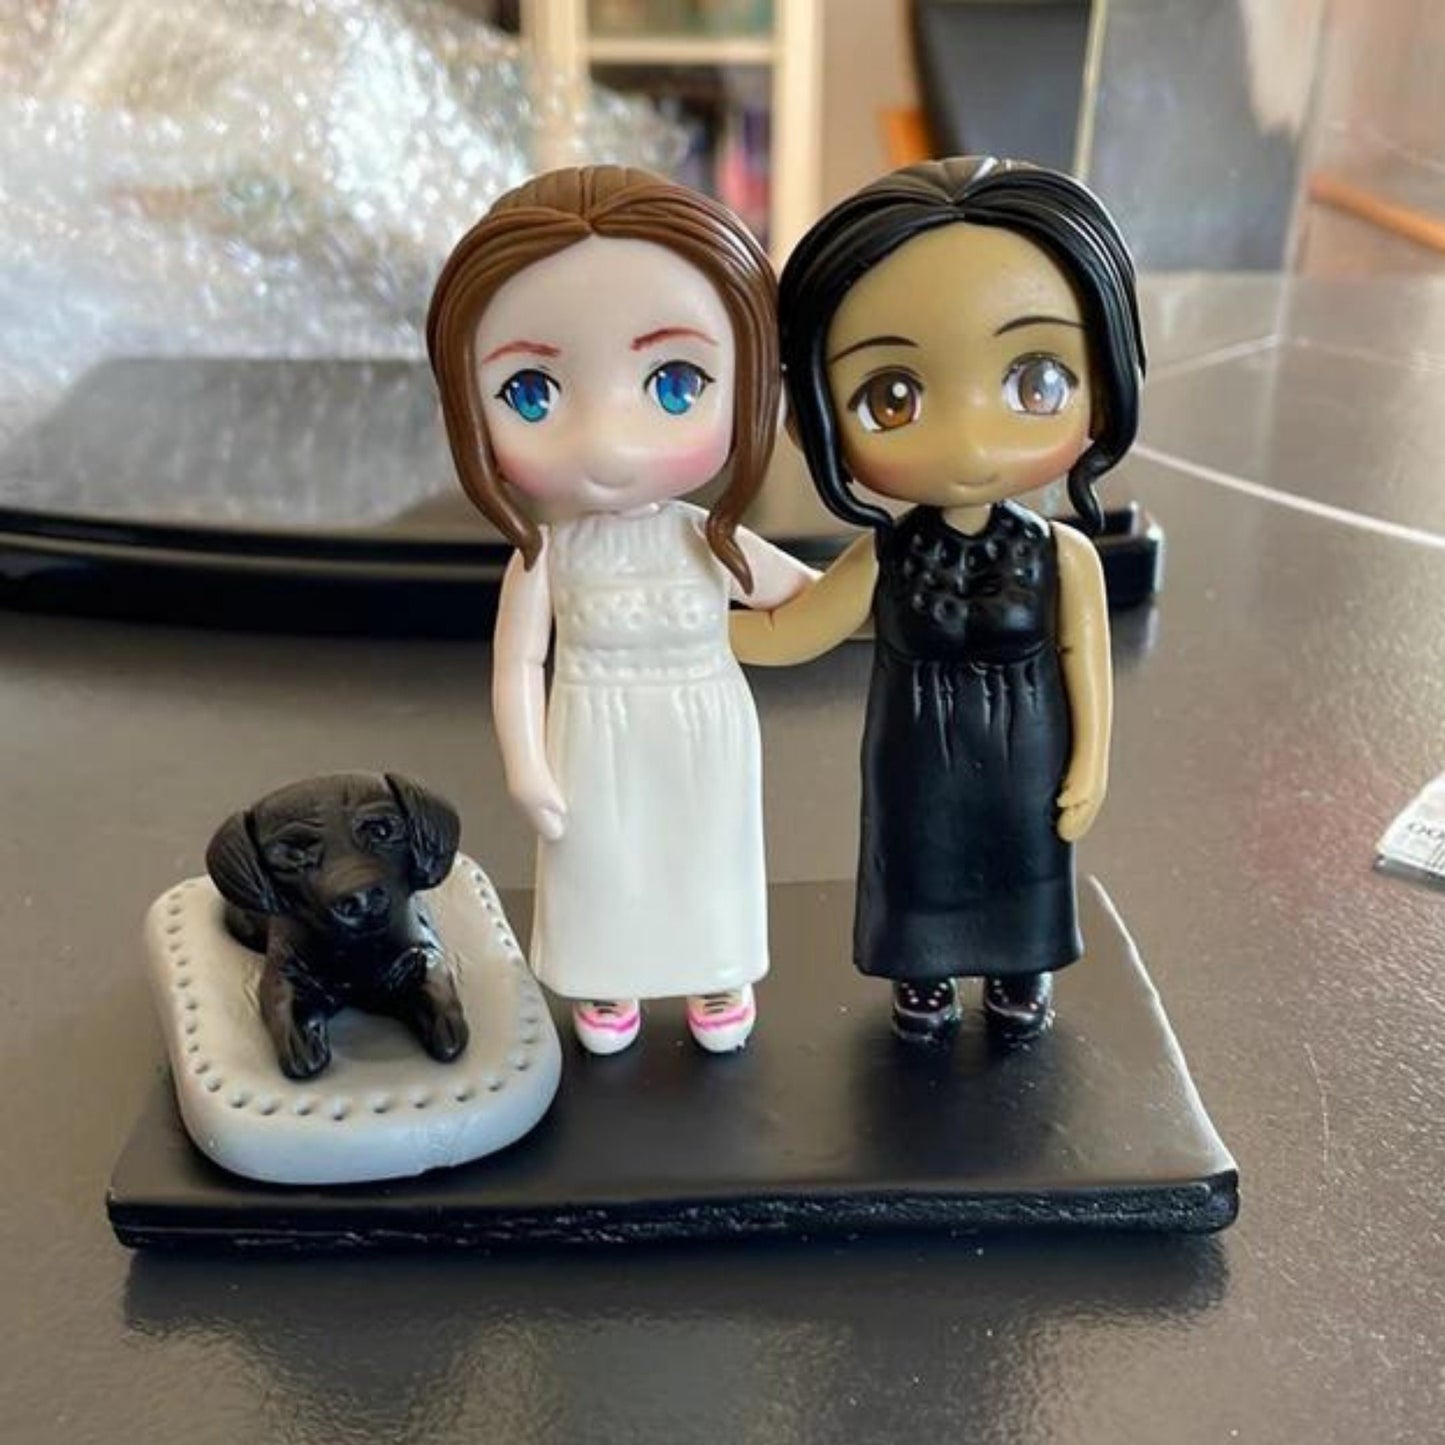 Custom made air dry clay figurine cake topper for weddings, birthdays and special occasions